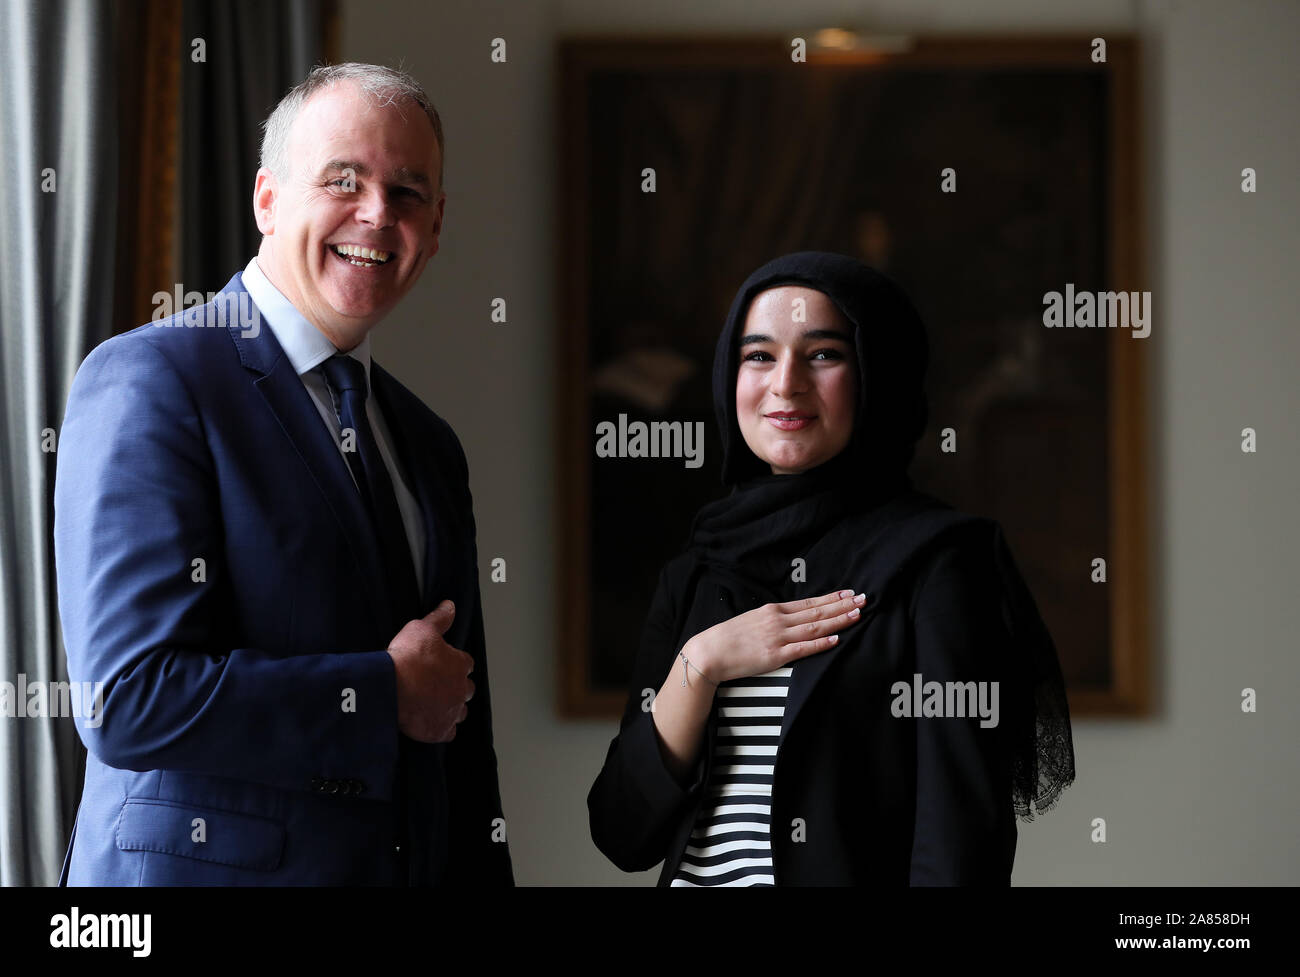 Minister for Education Joe McHugh with RCSI medical student Suaad Alshleh at the Royal College of Surgeons Ireland in Dublin. Suaad was presented with the inaugral Professor William C Campbell Bursary which recognises the work of the Donegal Nobel Prize winner. Stock Photo